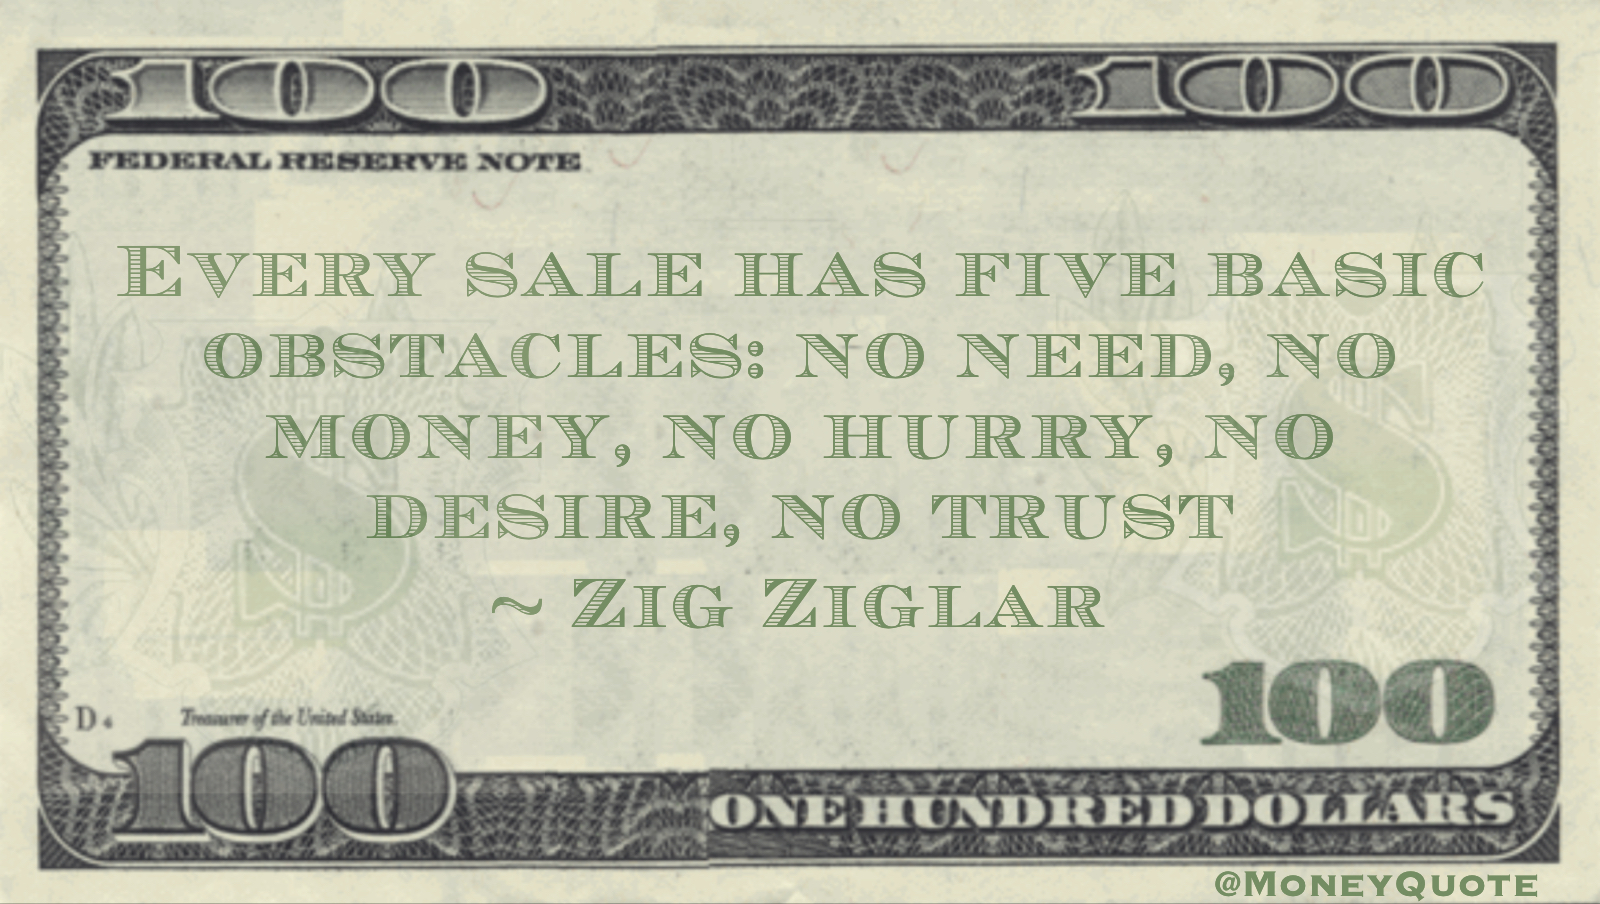 Every sale has five basic obstacles: no need, no money, no hurry, no desire, no trust Quote